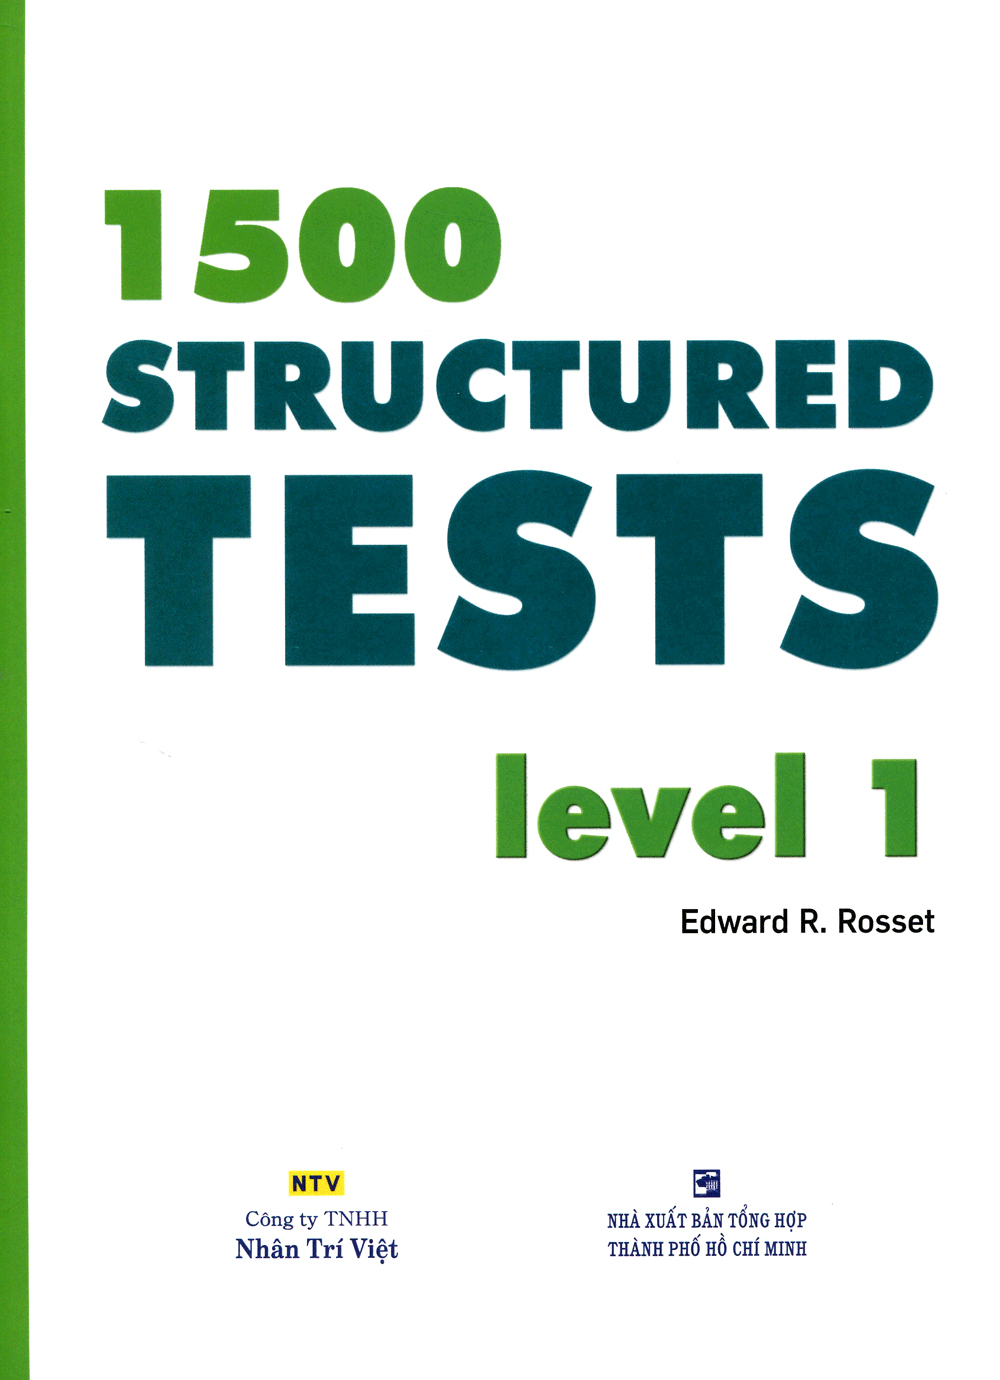 1500 Structured Tests Level 1 PDF